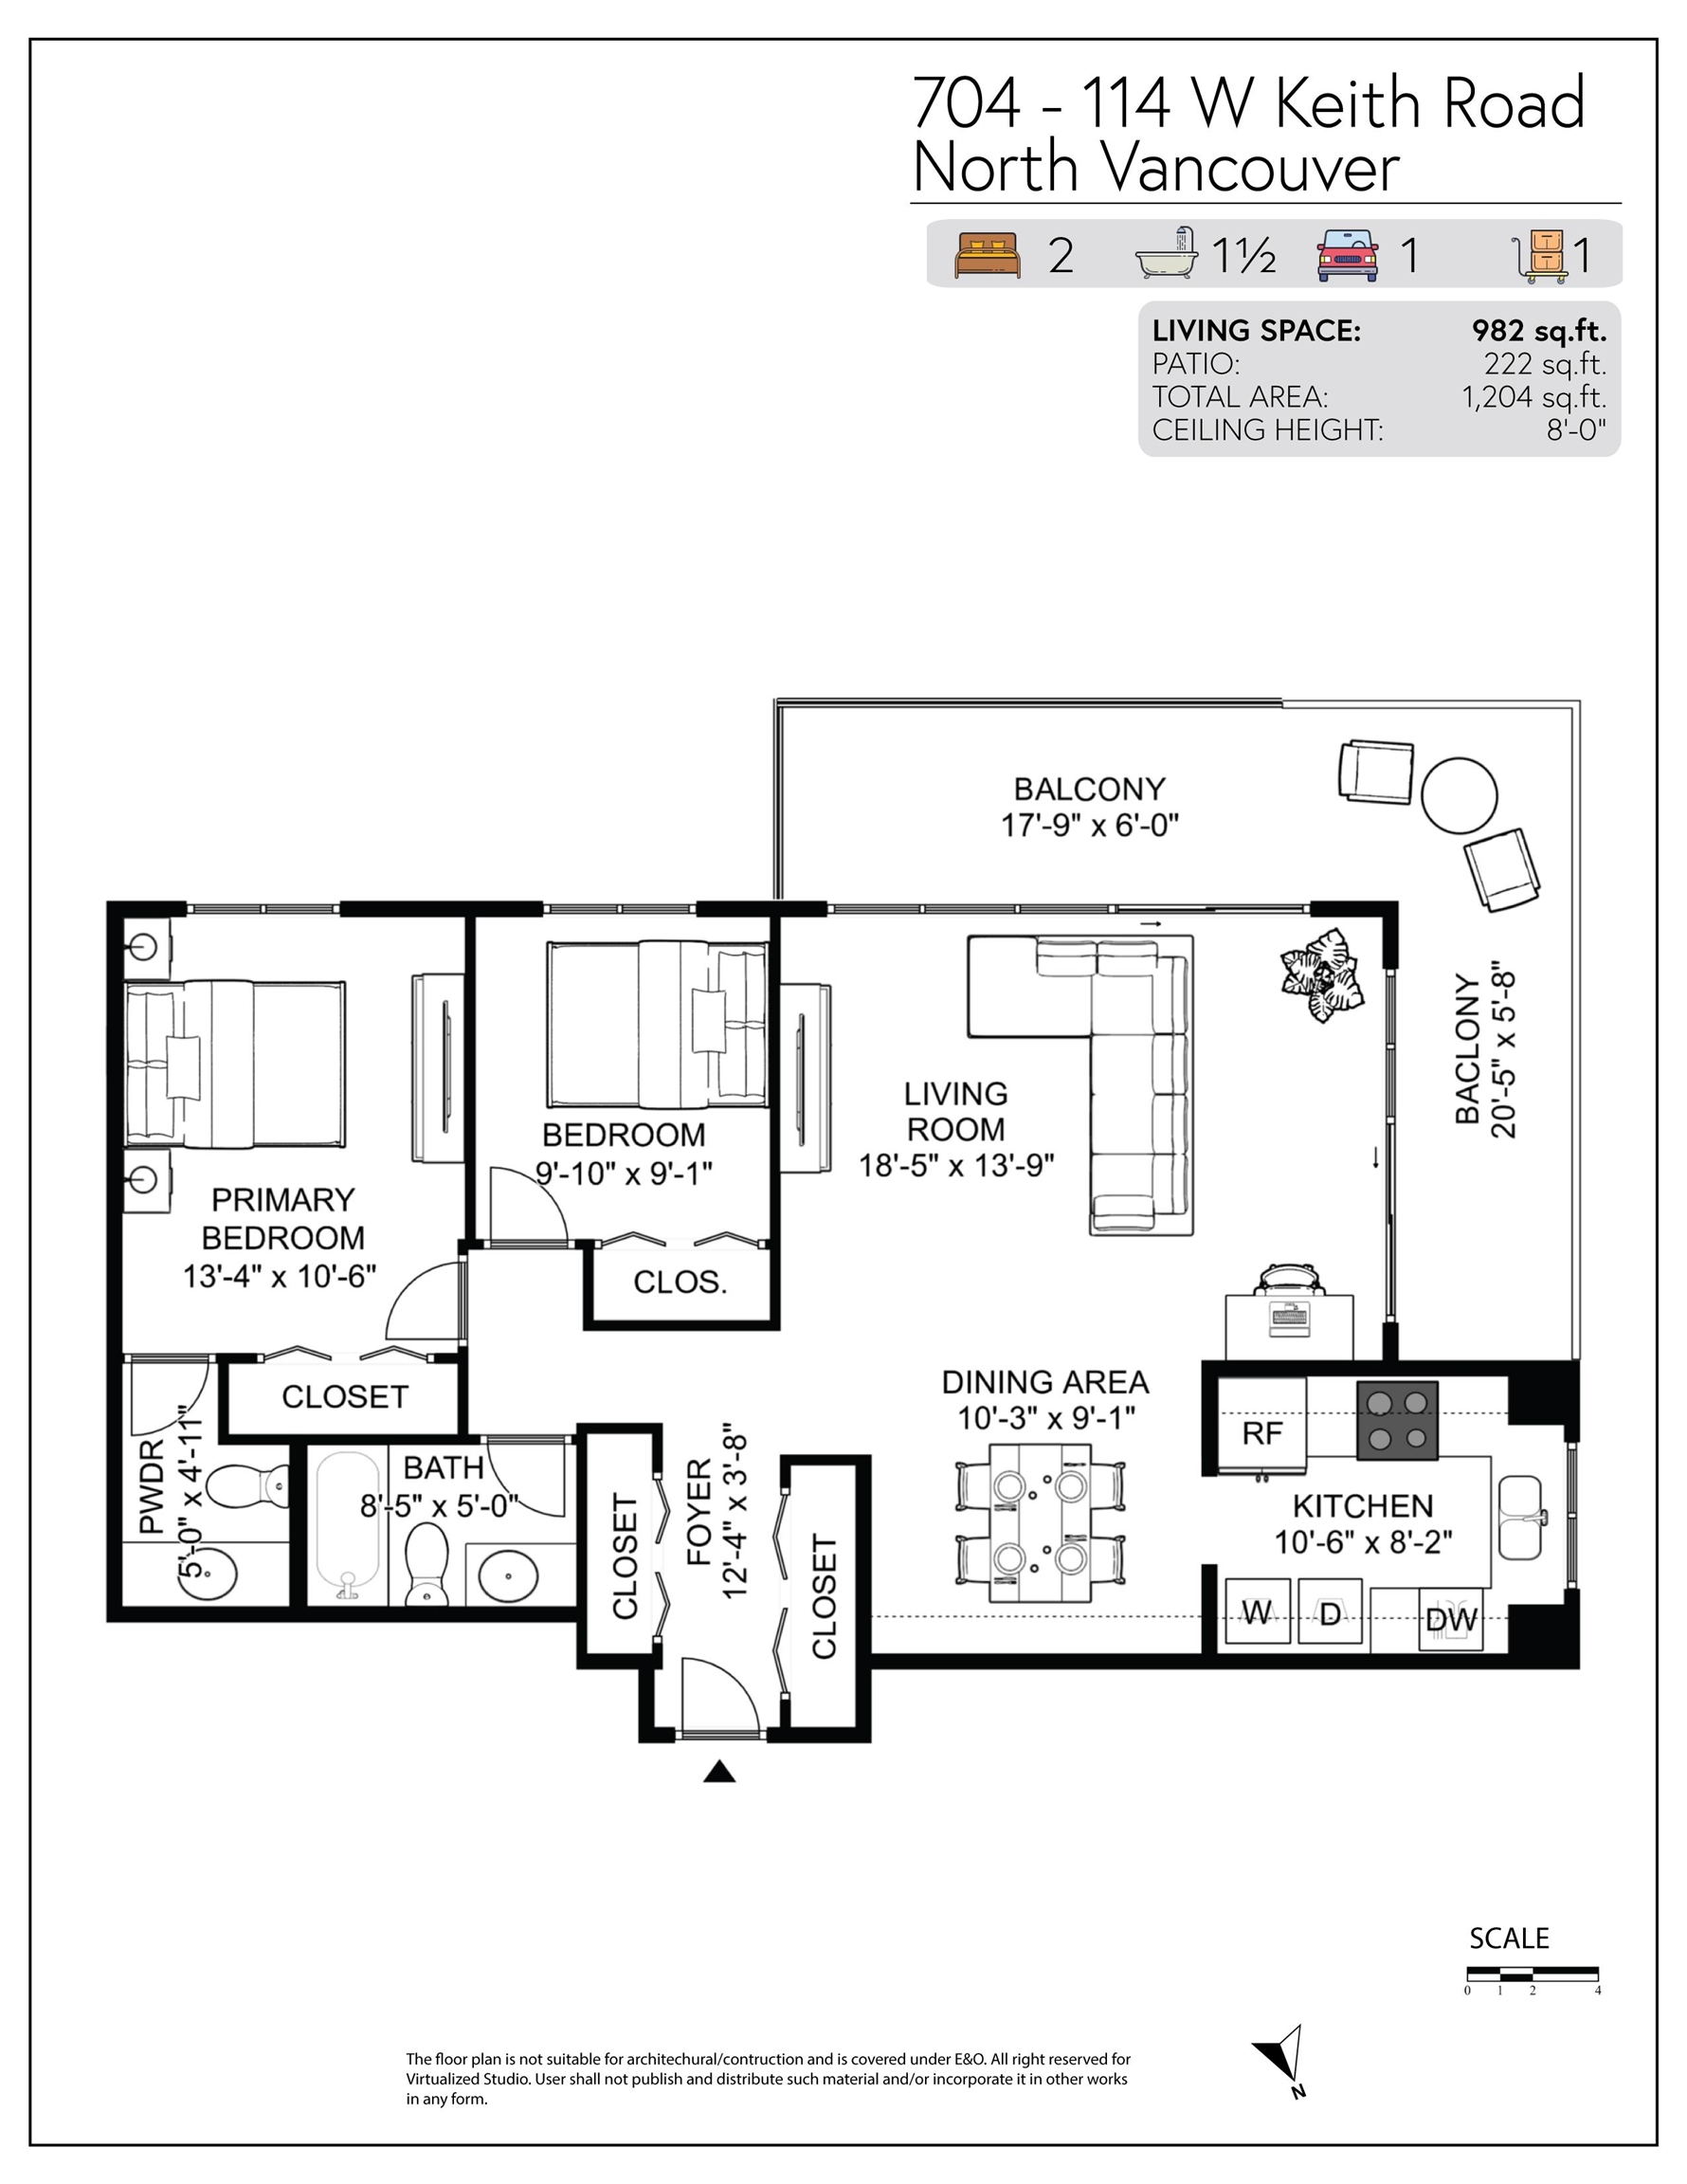 Listing image of 704 114 W KEITH ROAD